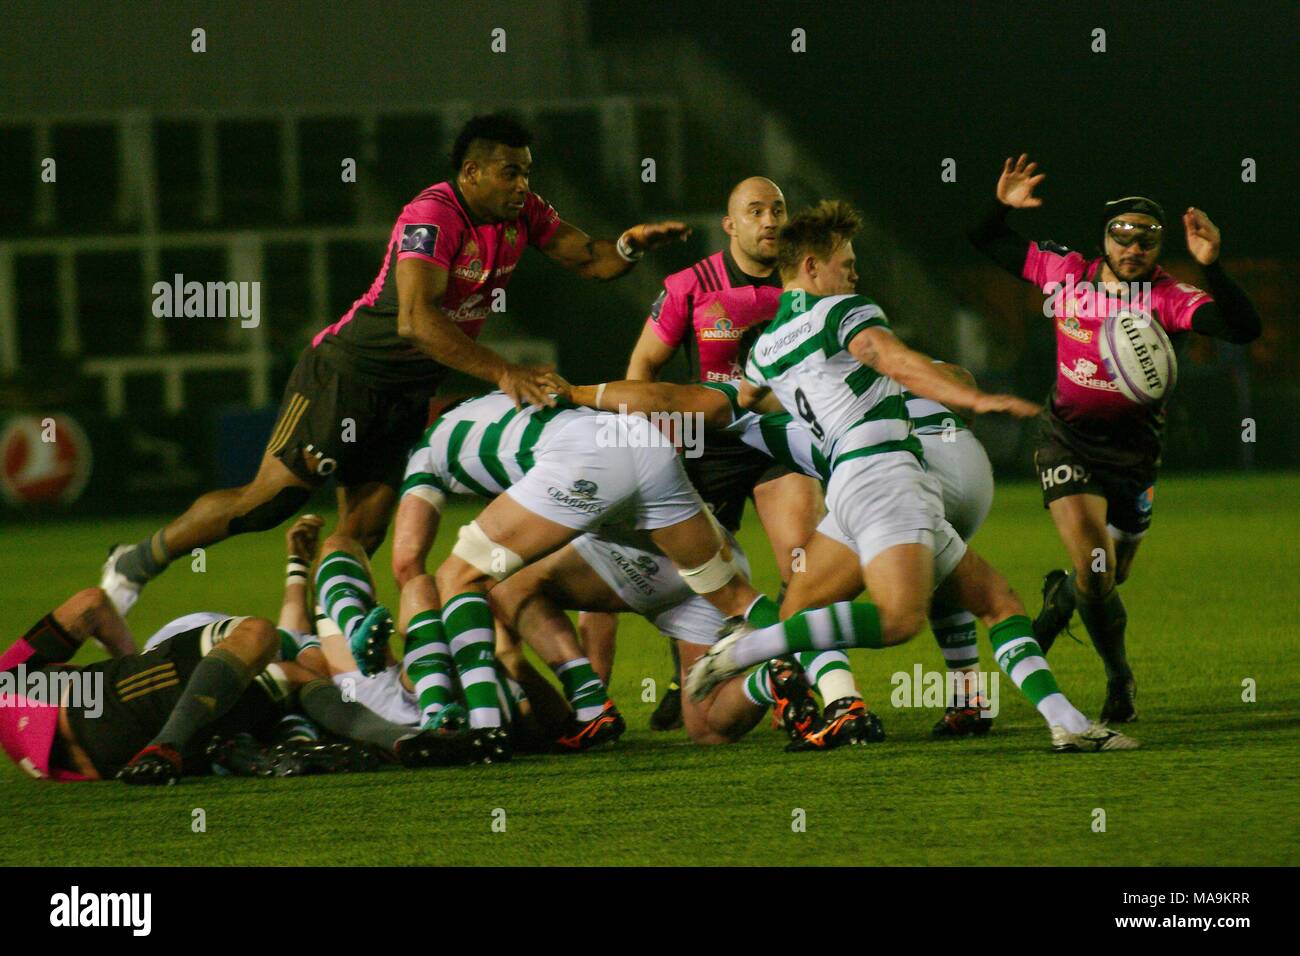 Newcastle upon Tyne, England, 30 March 2018. Sam Stuart, scrum half for Newcastle Falcons, kicking the ball. Brive scrum half Florian Cazenave is trying to charge the kick in the European Challenge Cup quarter finals at Kingston Park. Credit: Colin Edwards/Alamy Live News. Stock Photo